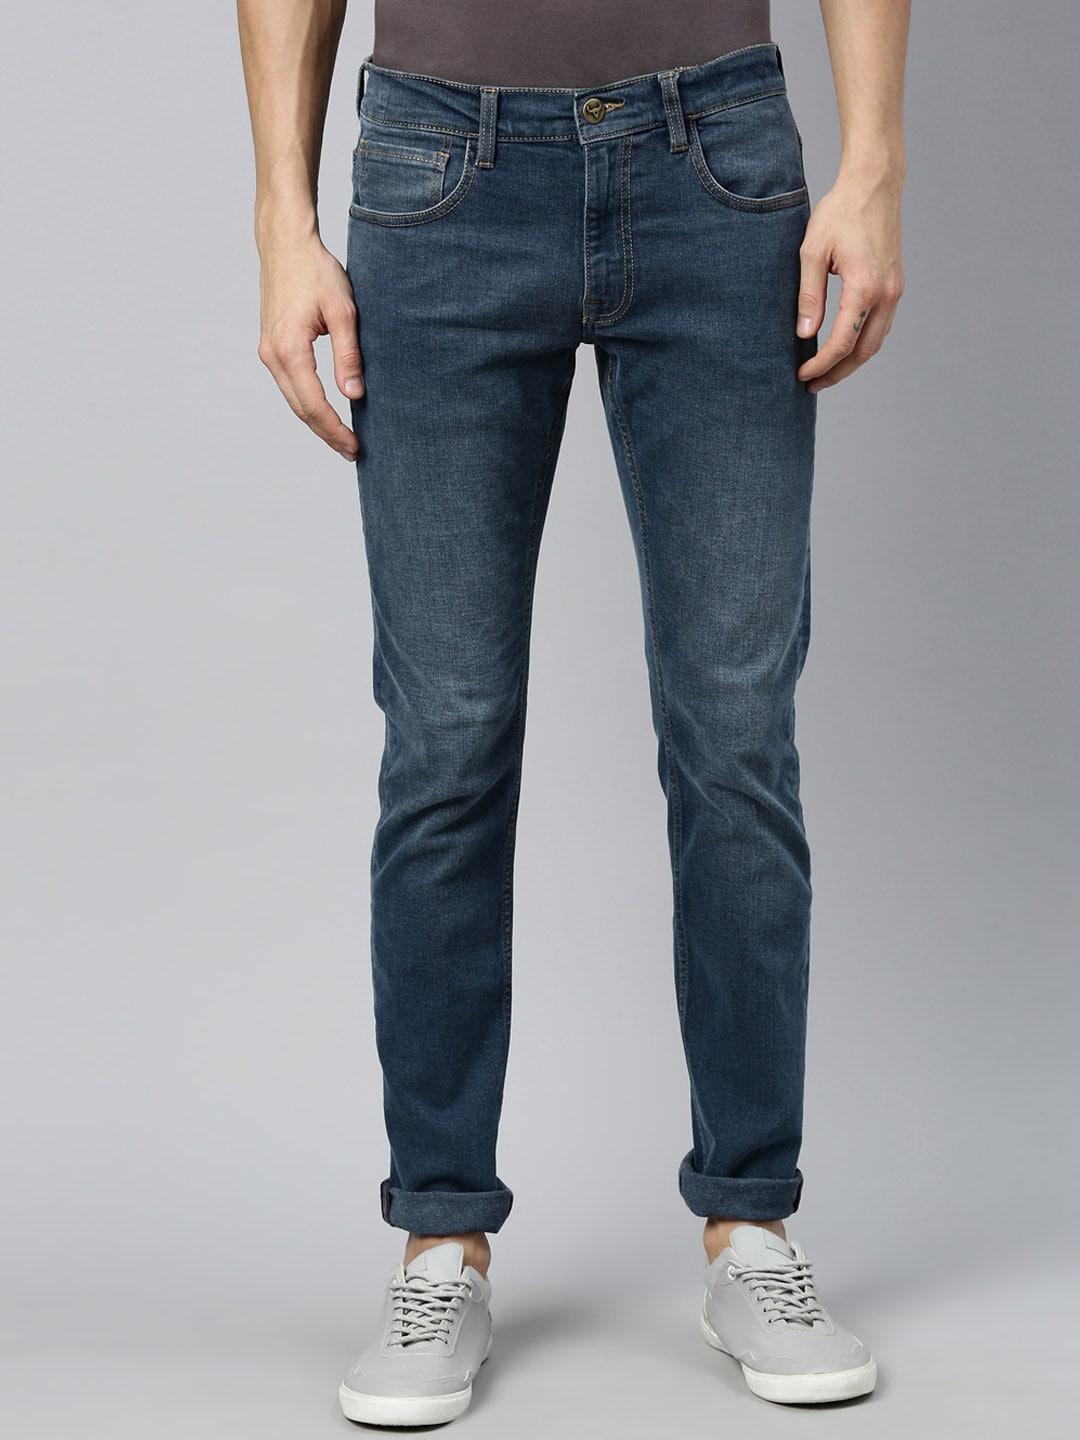 american-bull-men-skinny-fit-light-fade-stretchable-jeans